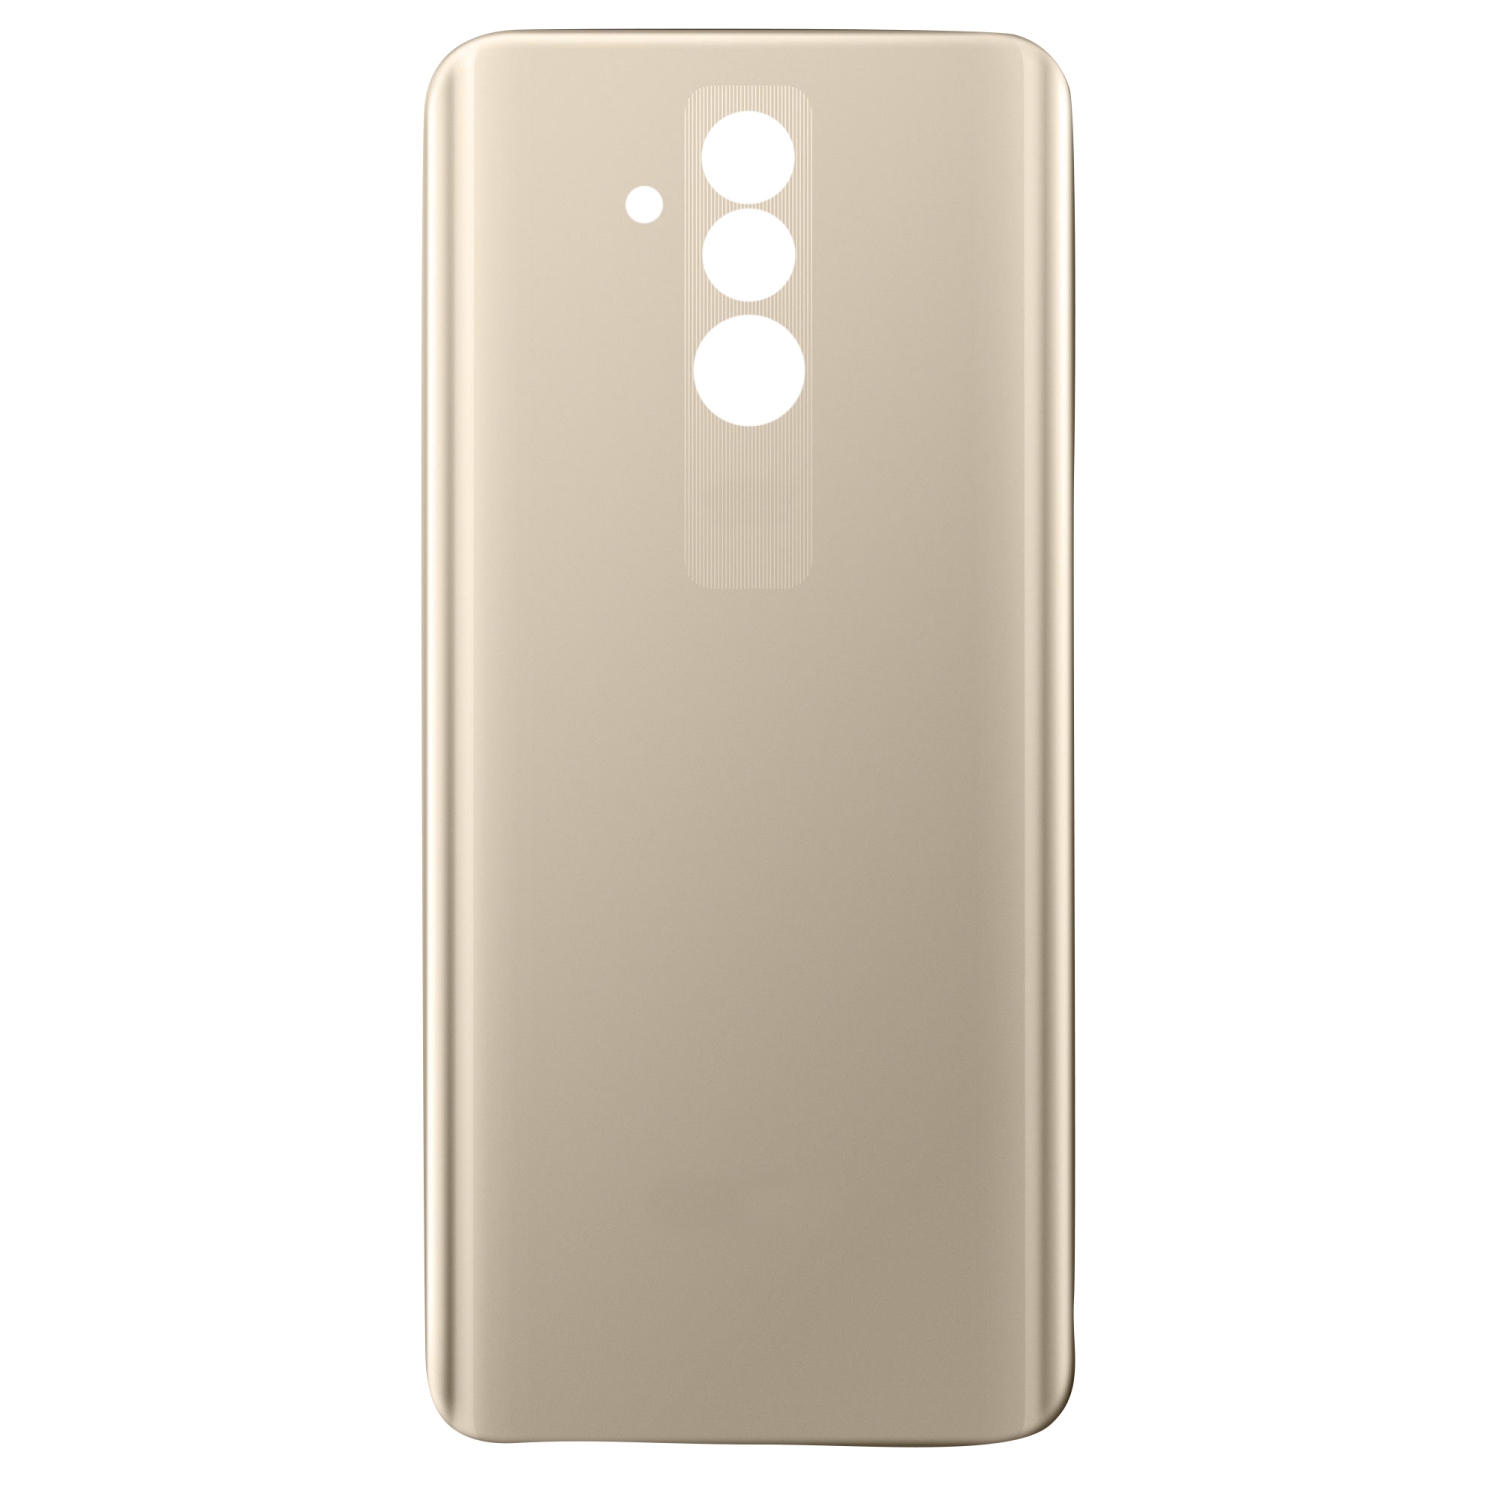 Replacement Battery Back Housing Glass Cover Compatible With Huawei Mate 20 Lite - Platinum Gold